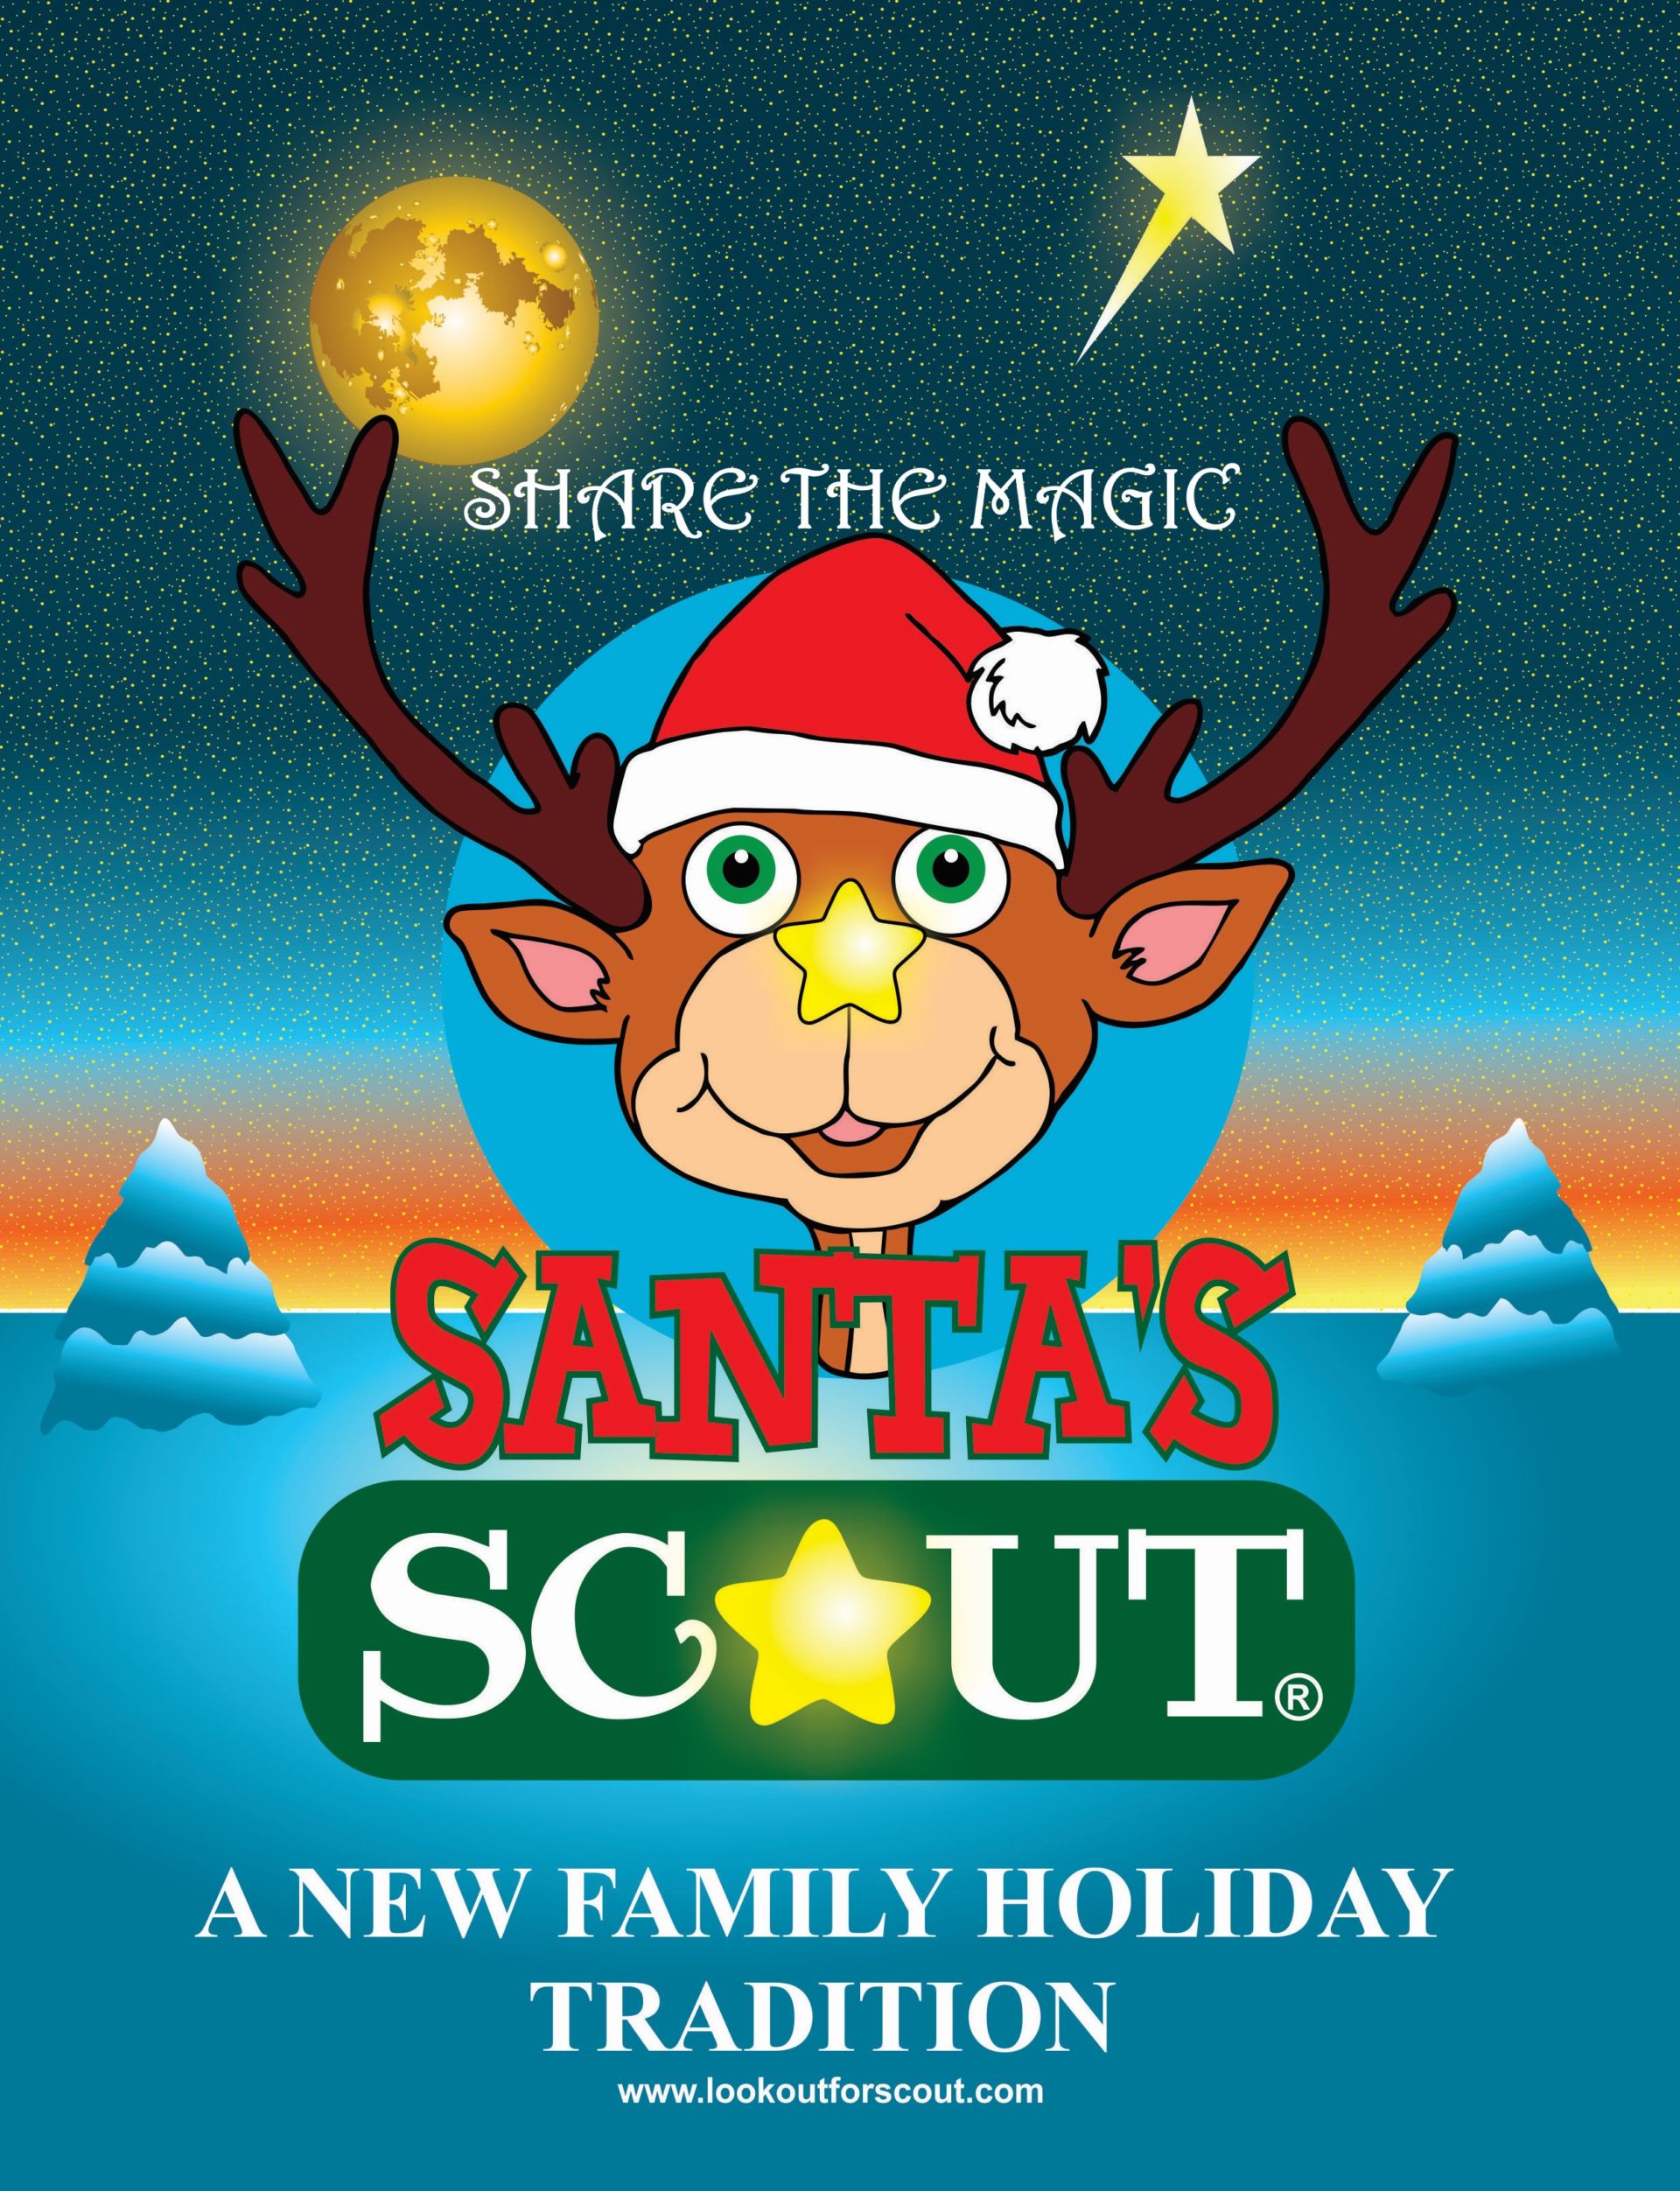 Santa’s Scout…A New Family Holiday Tradition